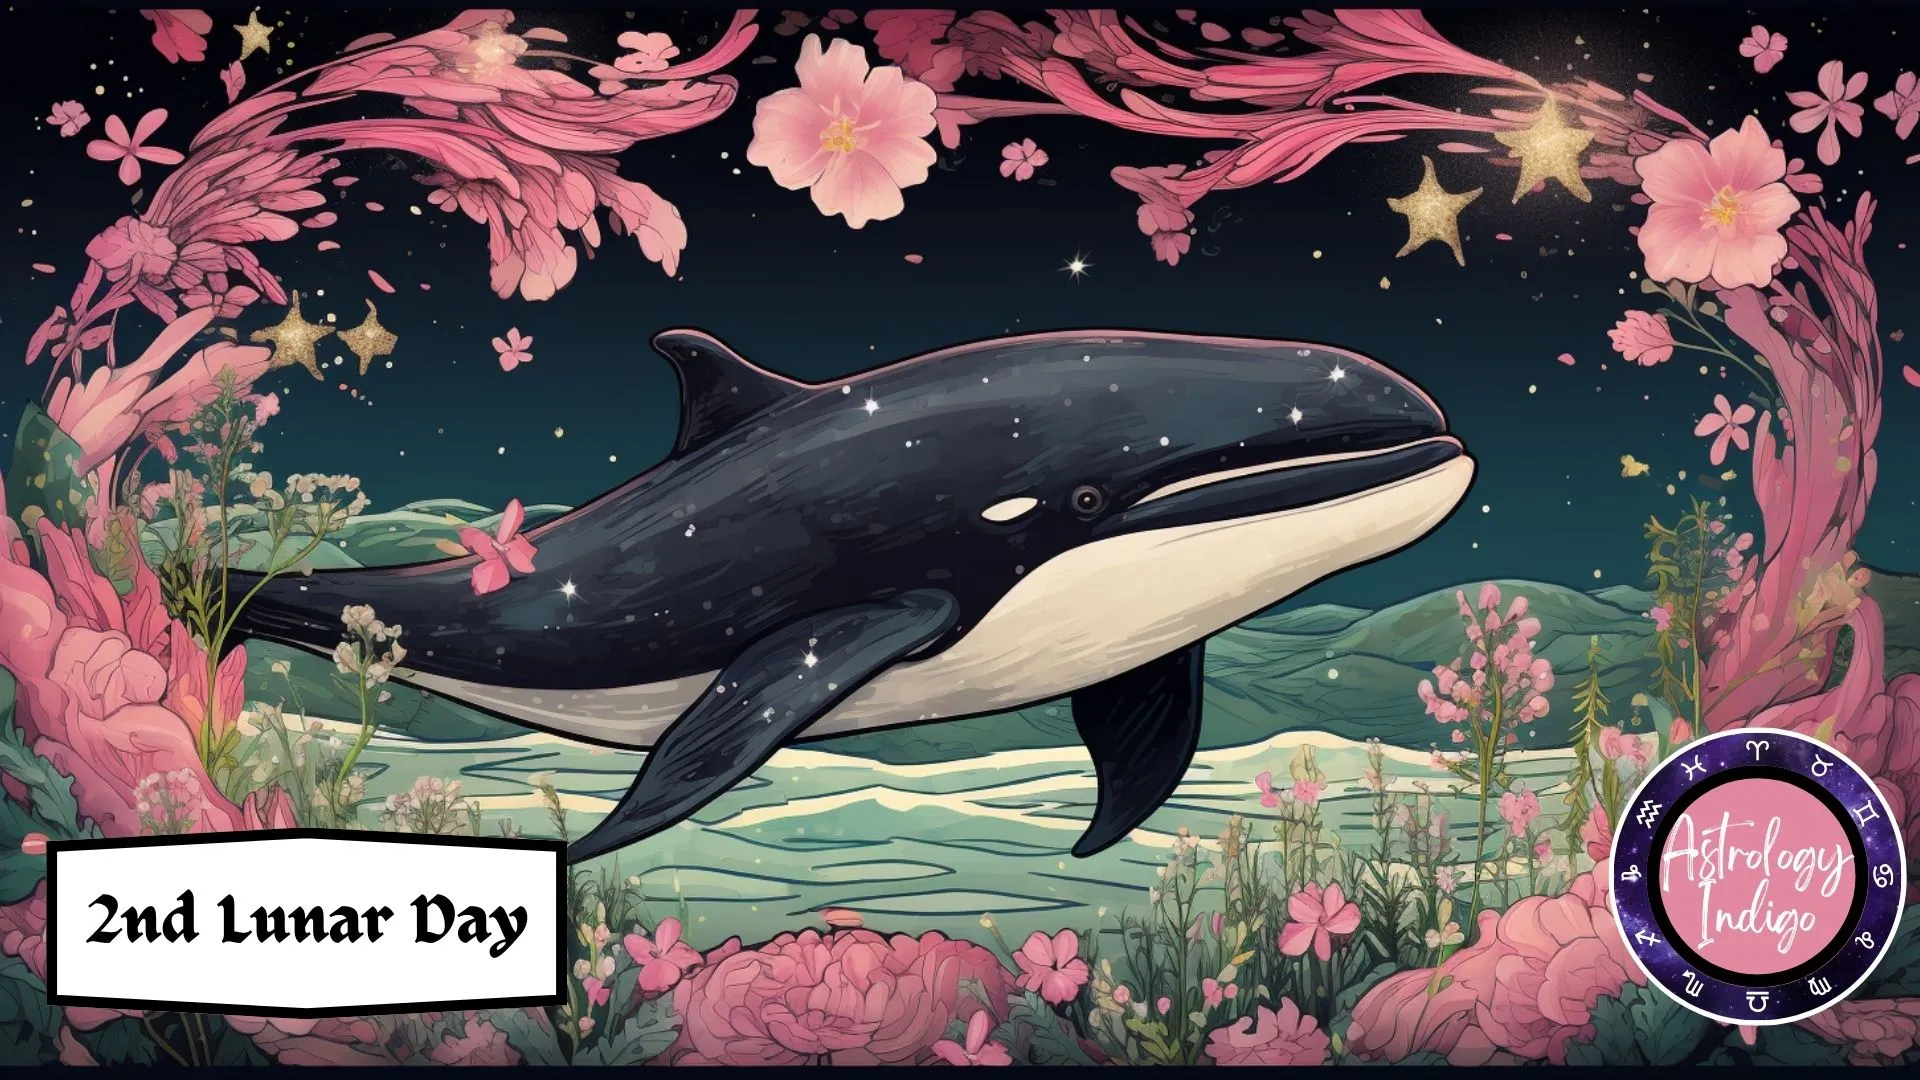 A Whale floats among the stars, there is a pink and green banner of flowers along the edges